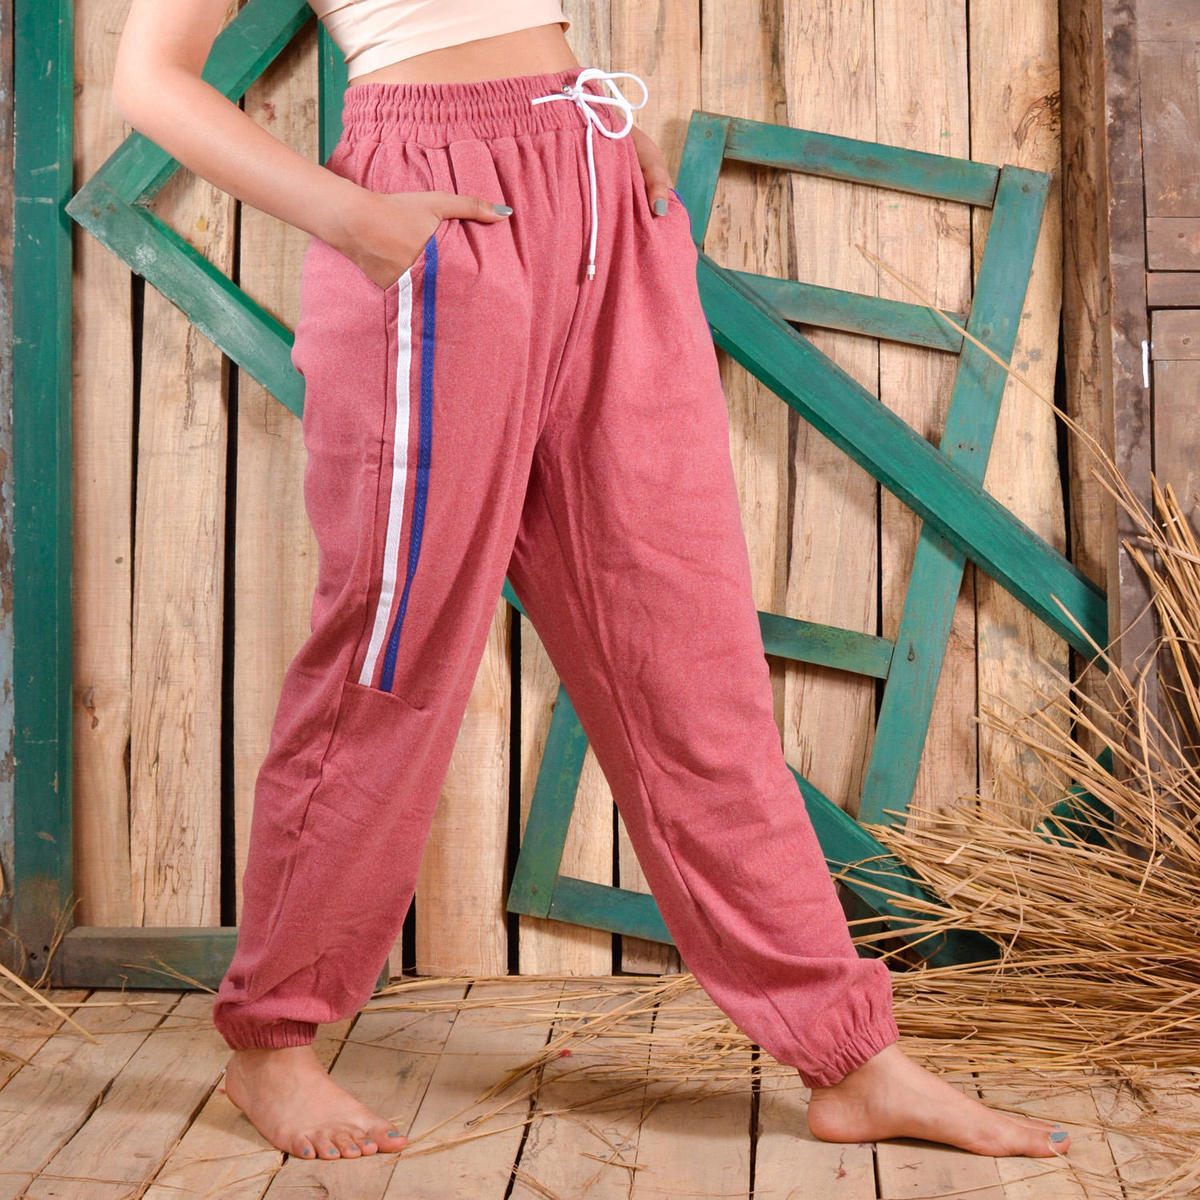 women winter casual thick material warm sweatpants fleece elastic trousers track pants 3